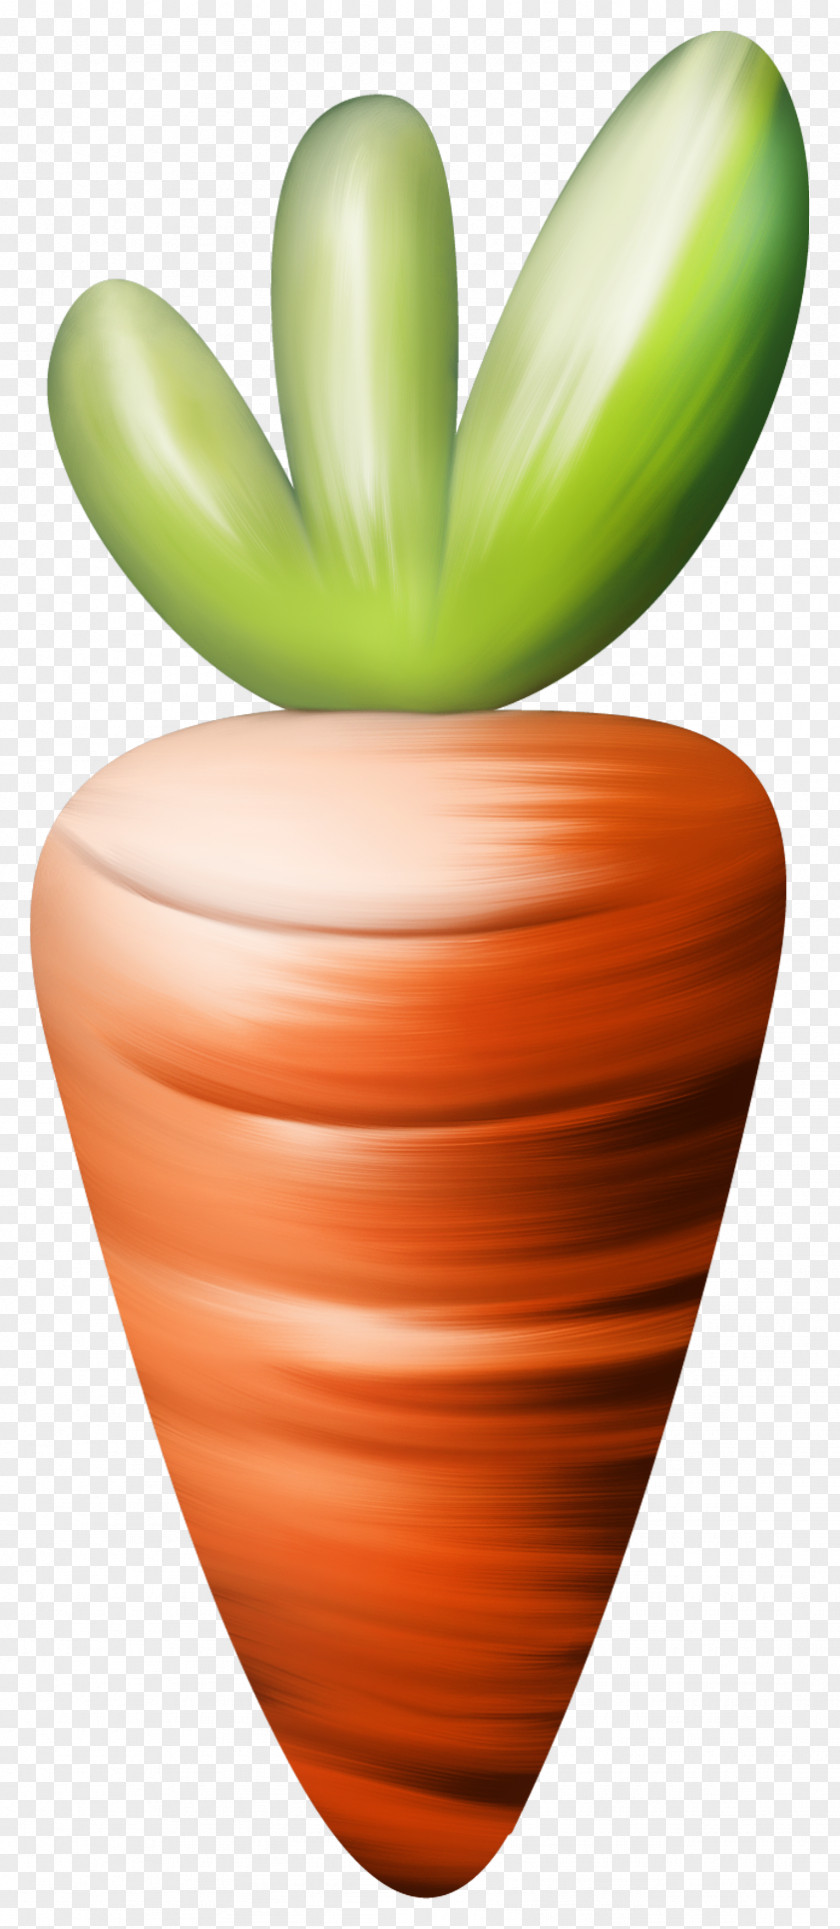 Yellow Carrots Carrot Vegetable PNG